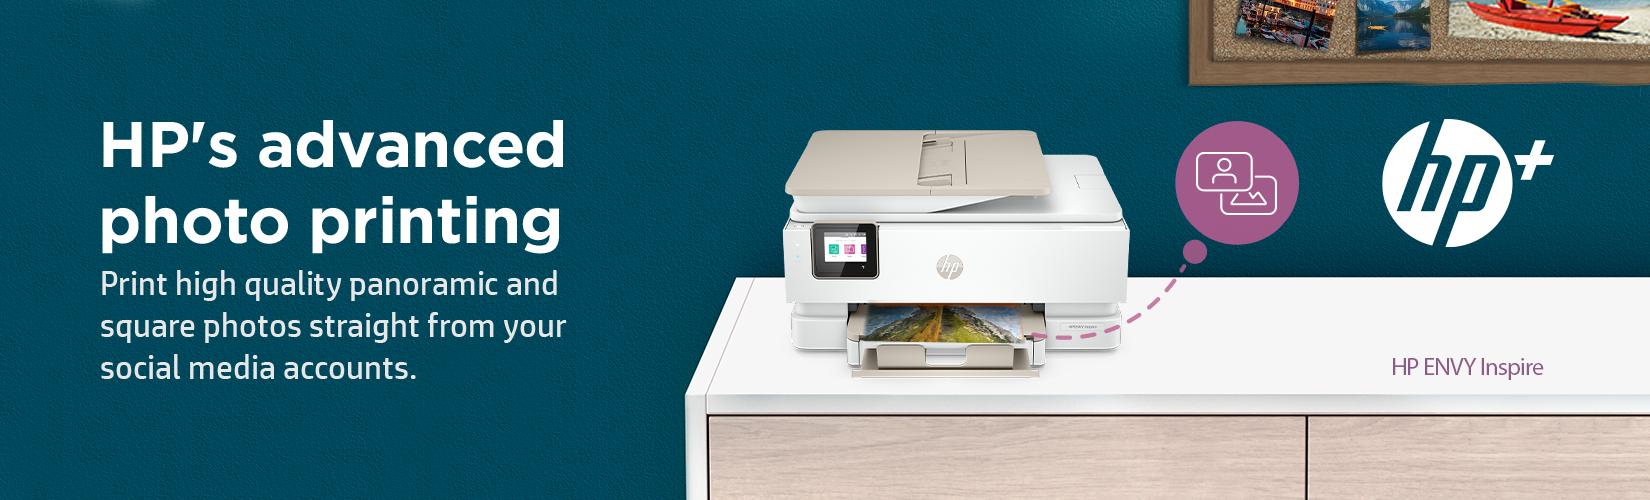 HP's advanced photo printing. Print high quality panoramic and square photos straight from your social media accounts.